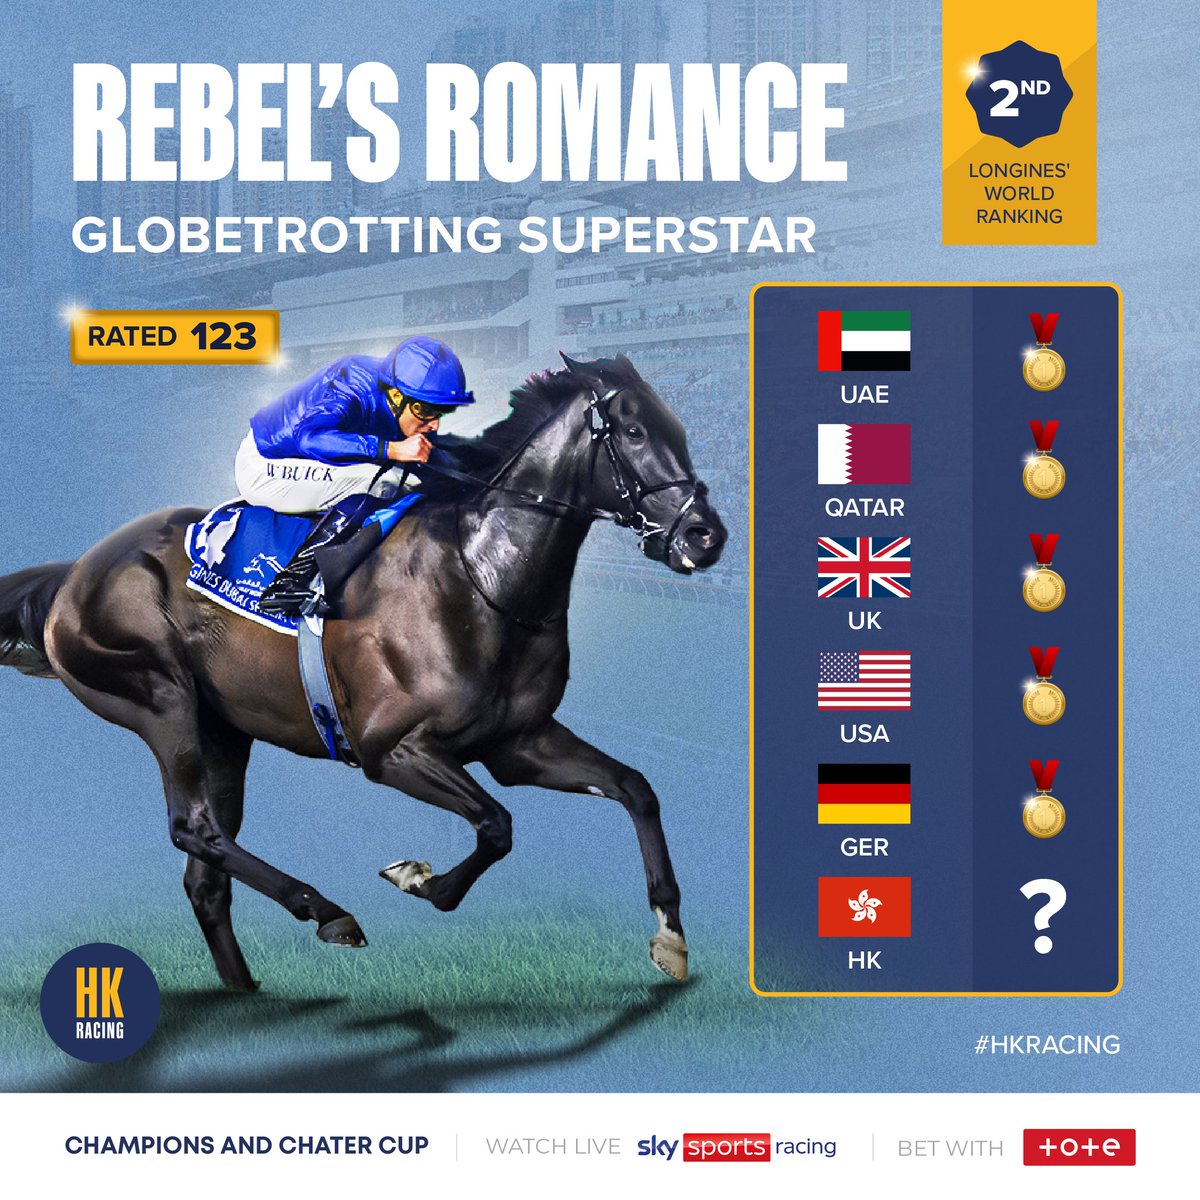 REBEL’S ROMANCE to reign supreme? 💙 @godolphin’s four-time G1 winner across three continents takes on Hong Kong's stars in the £1.3m Champions & Chater Cup this Sunday. #HKRacing | #TripleCrown